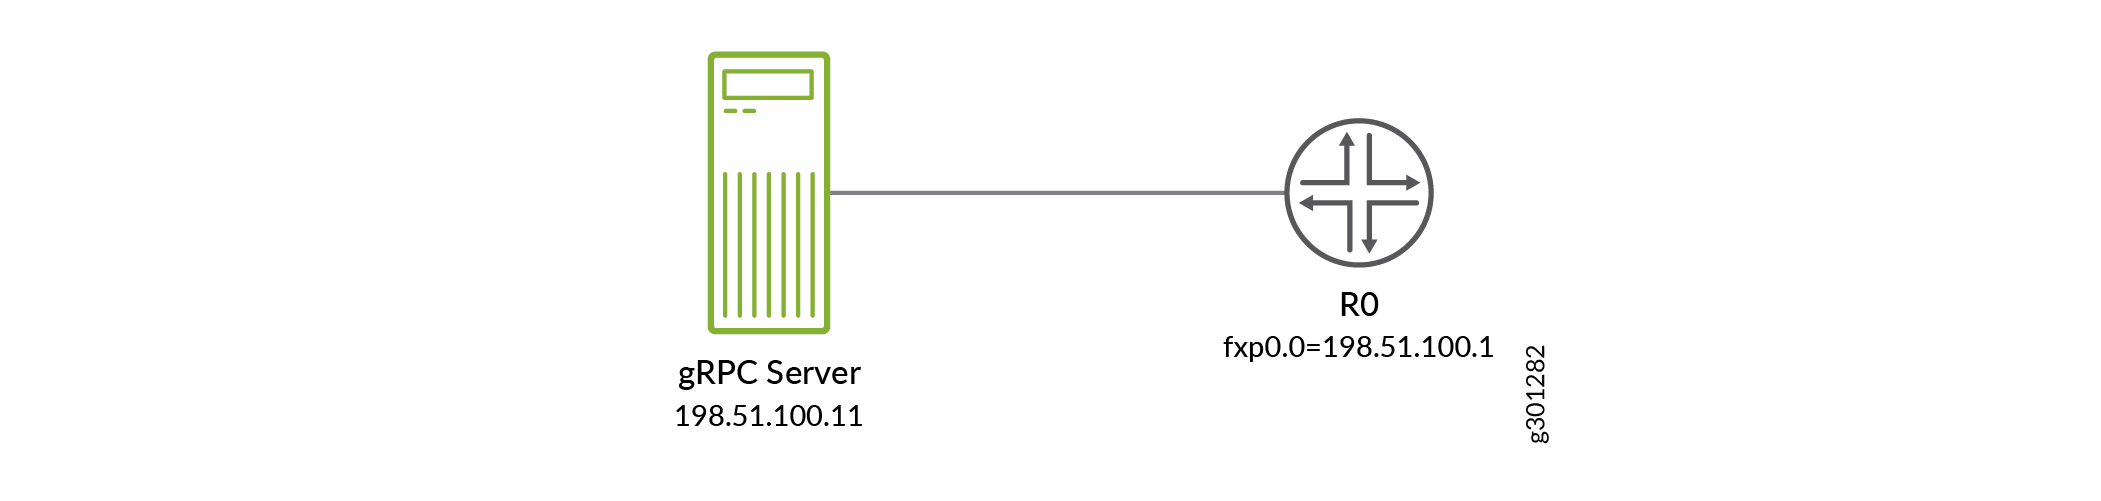 NETCONF over Outbound HTTPS Topology